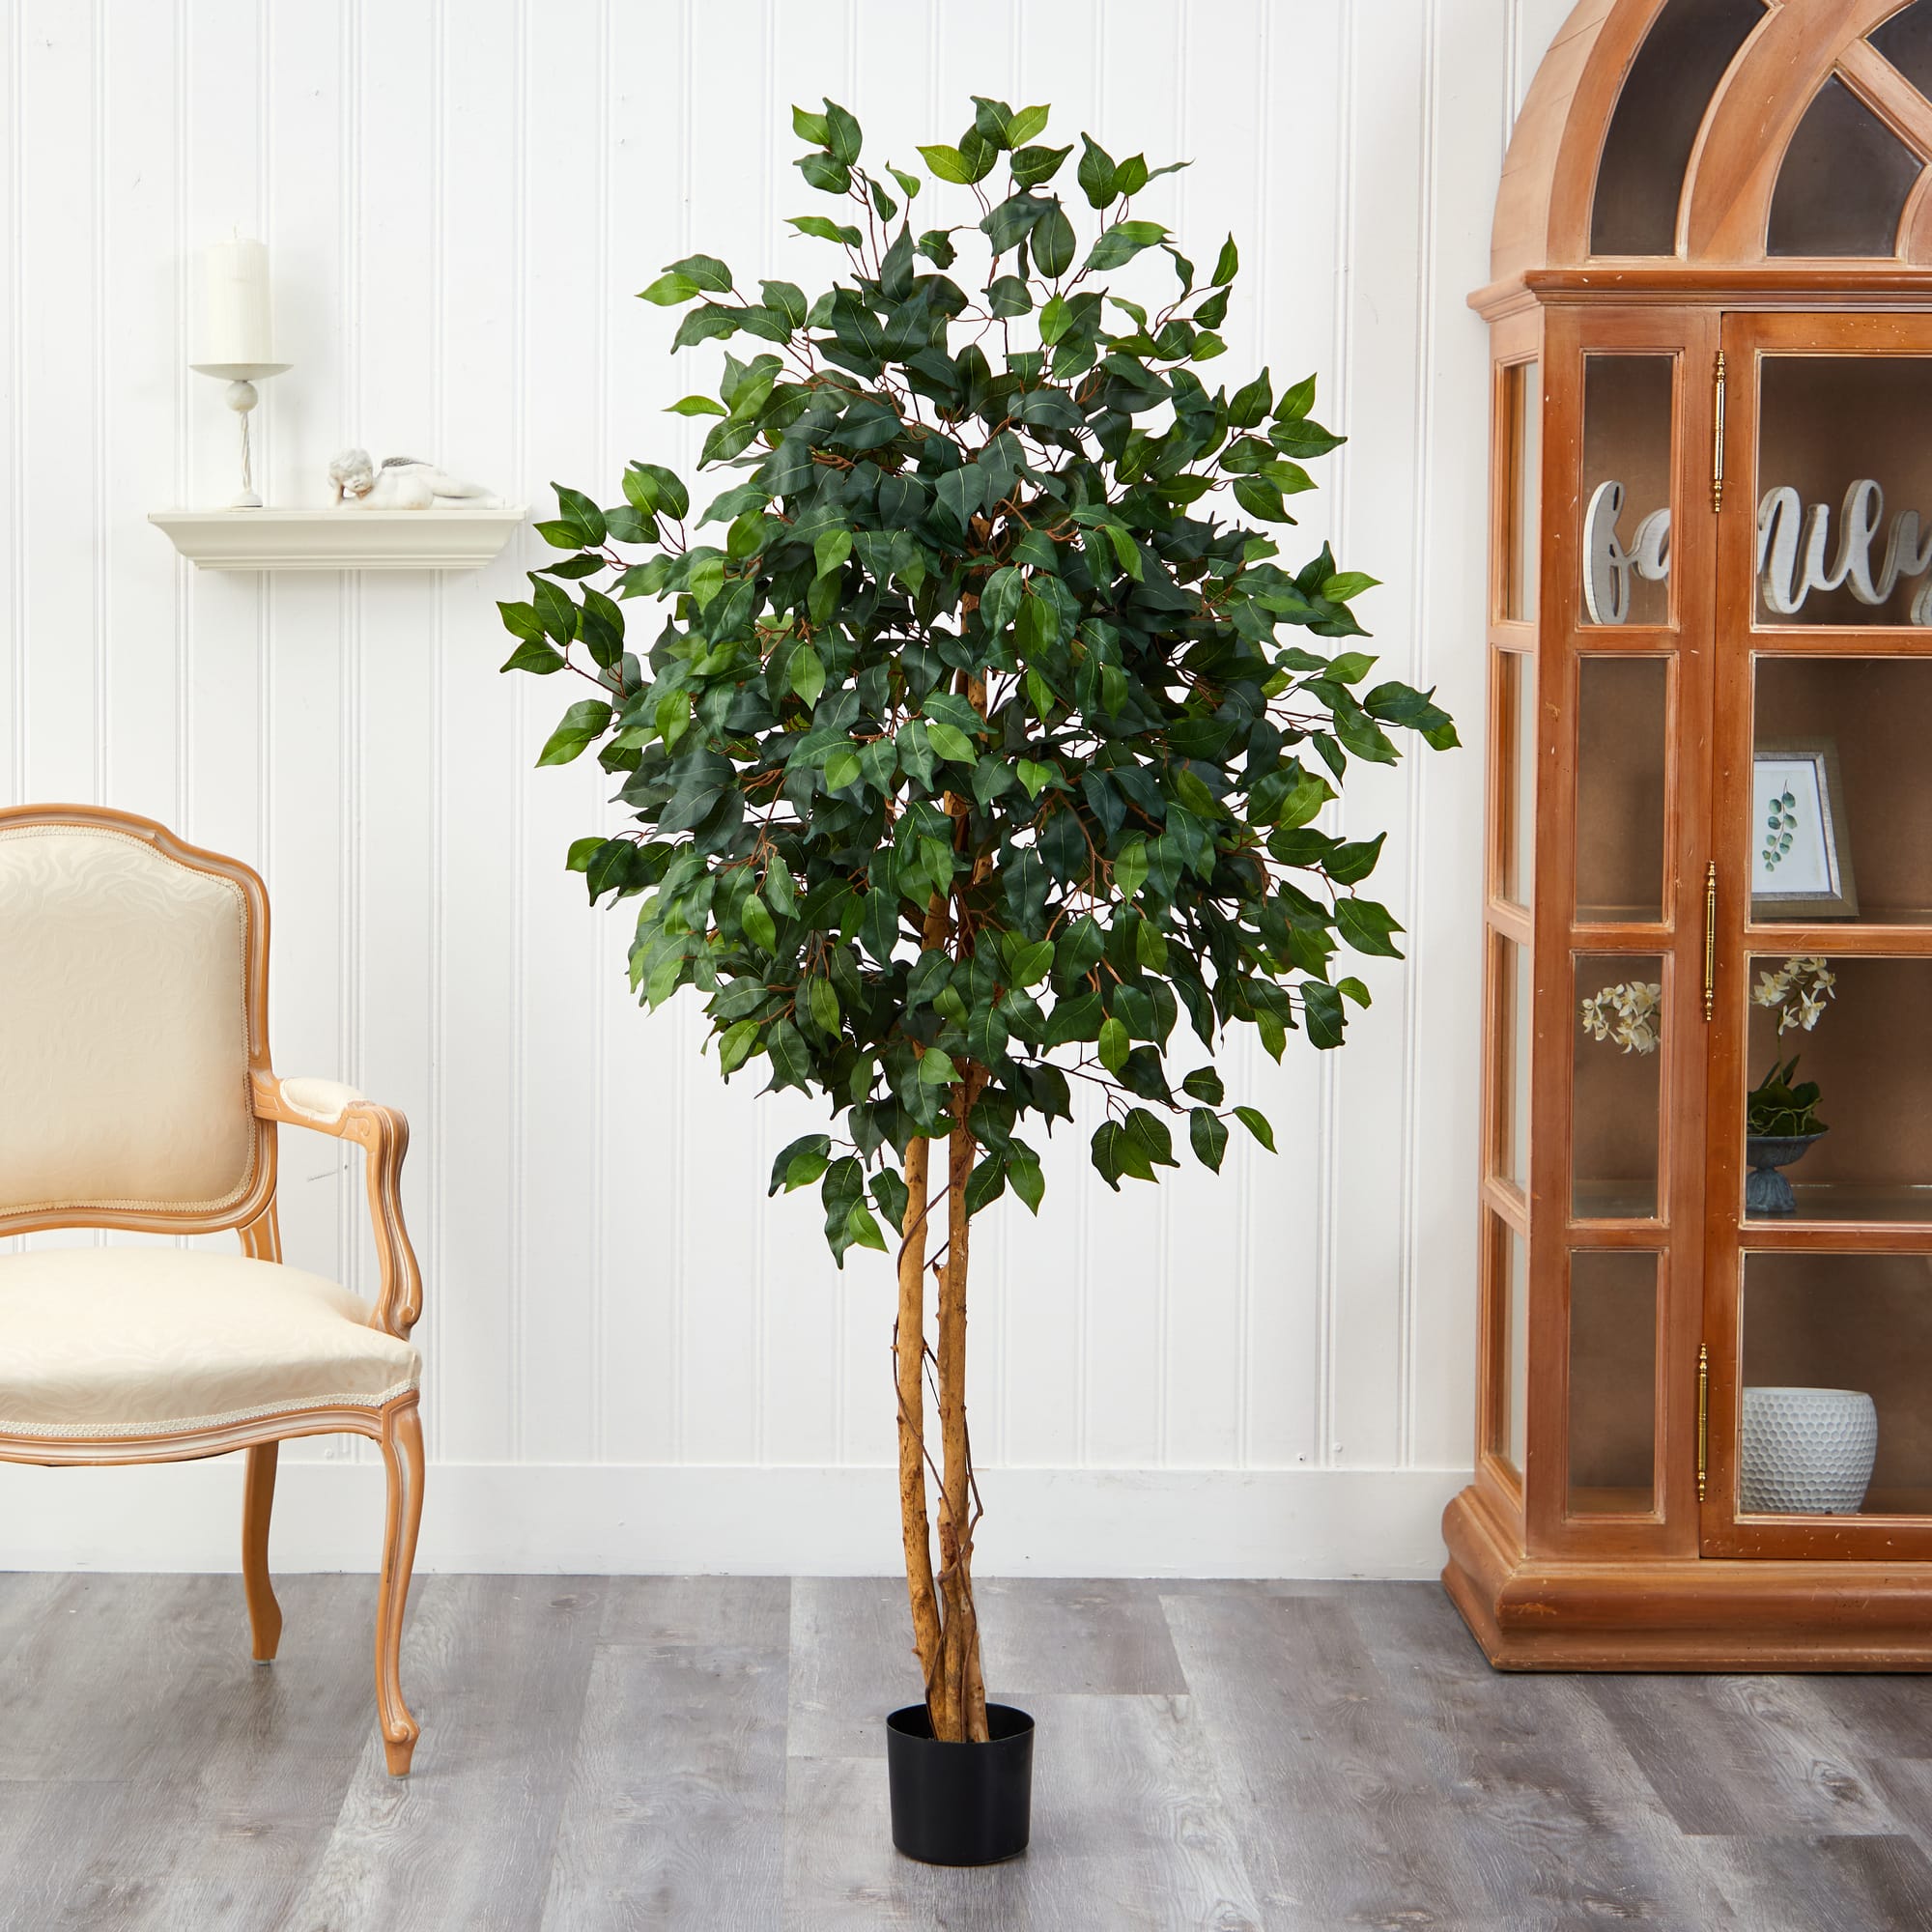 5ft. Potted Ficus Tree